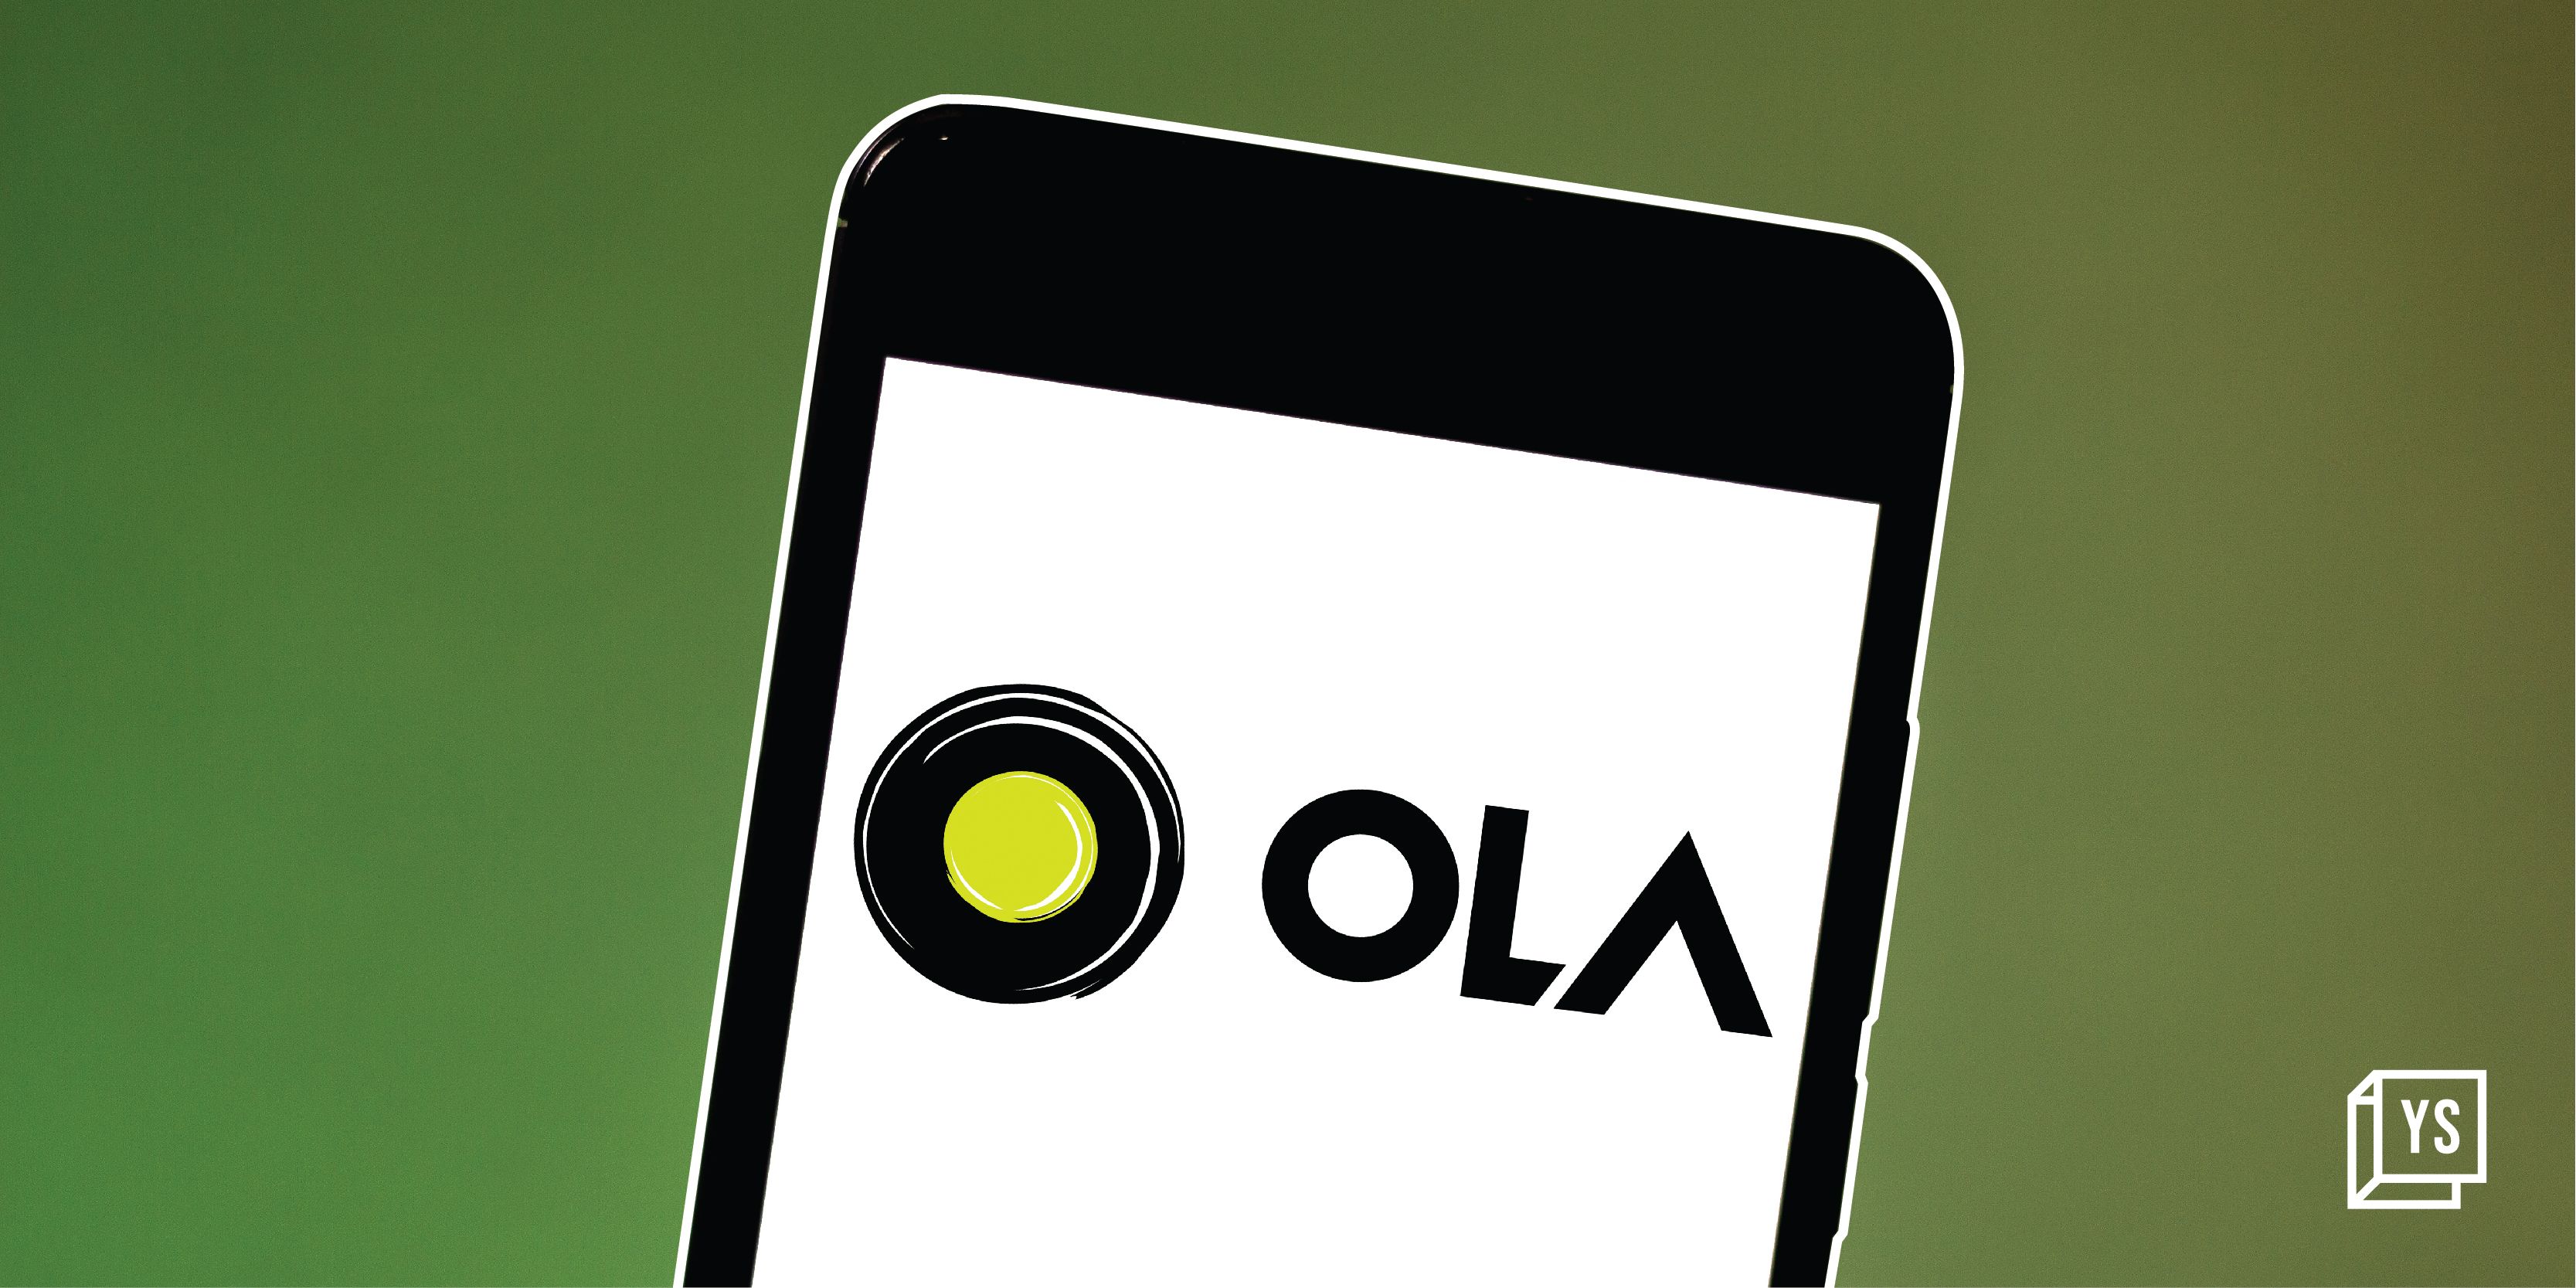 Ola lures bike-taxi riders with salary of up to Rs 70,000 per month: Report